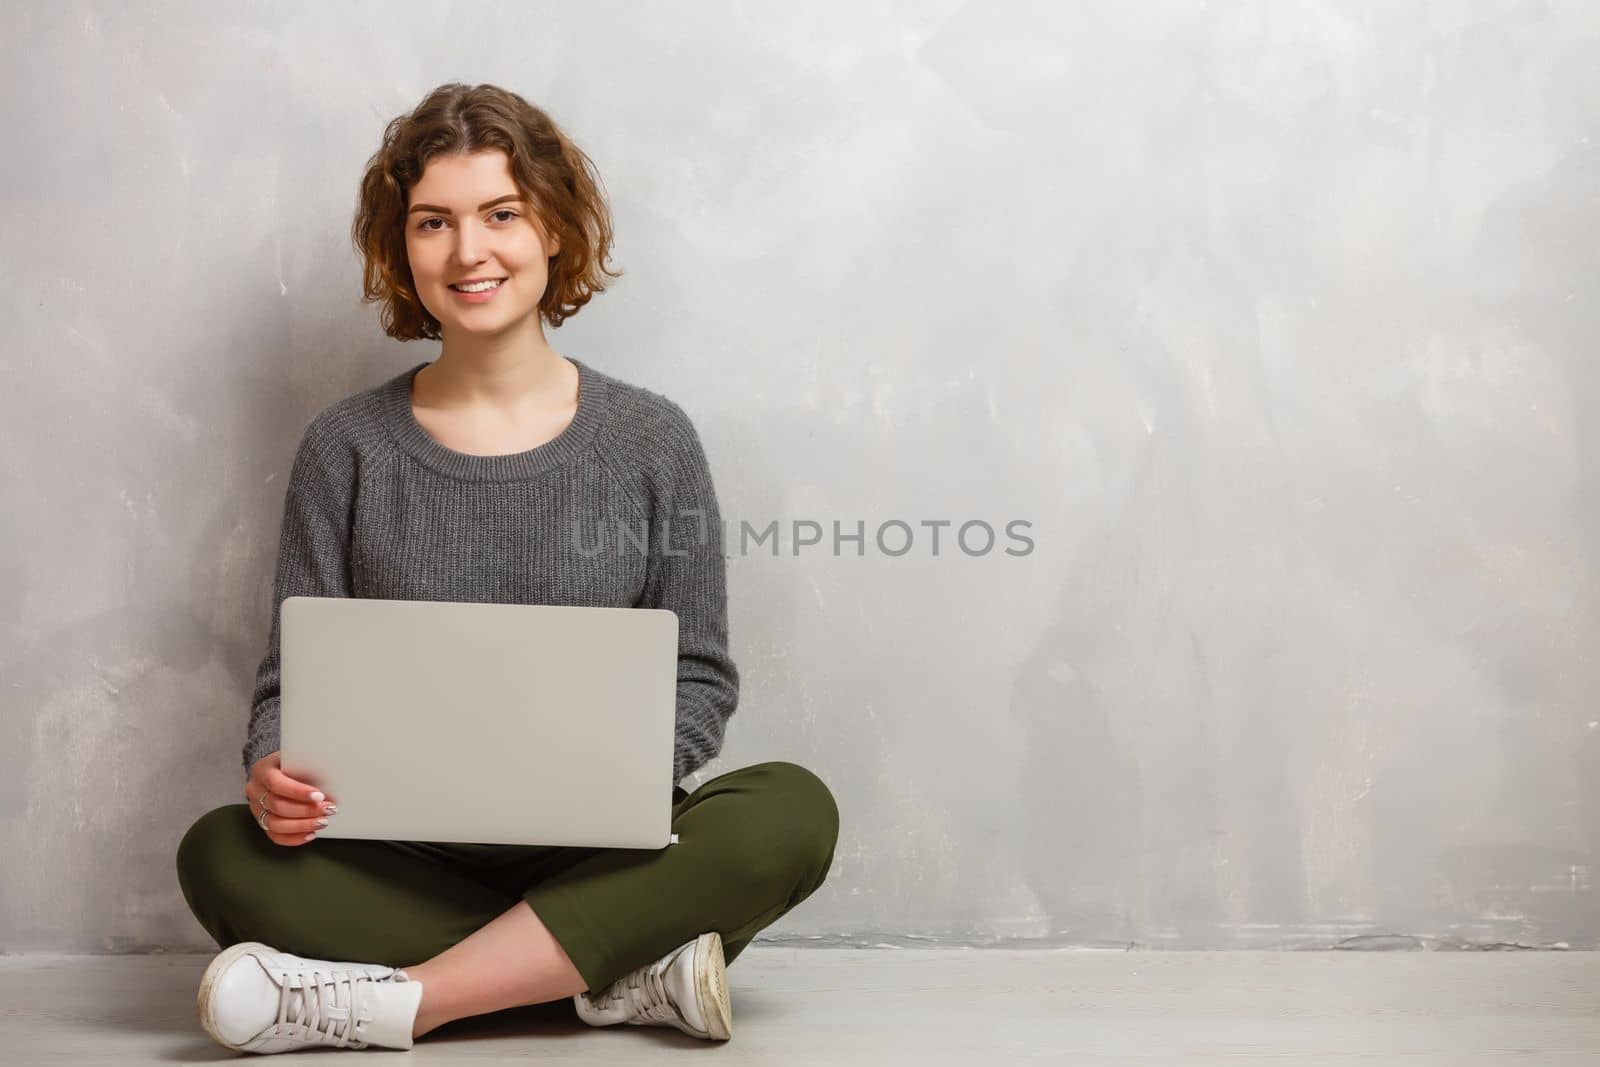 Happy young woman sitting on the floor with crossed legs and using laptop on gray background